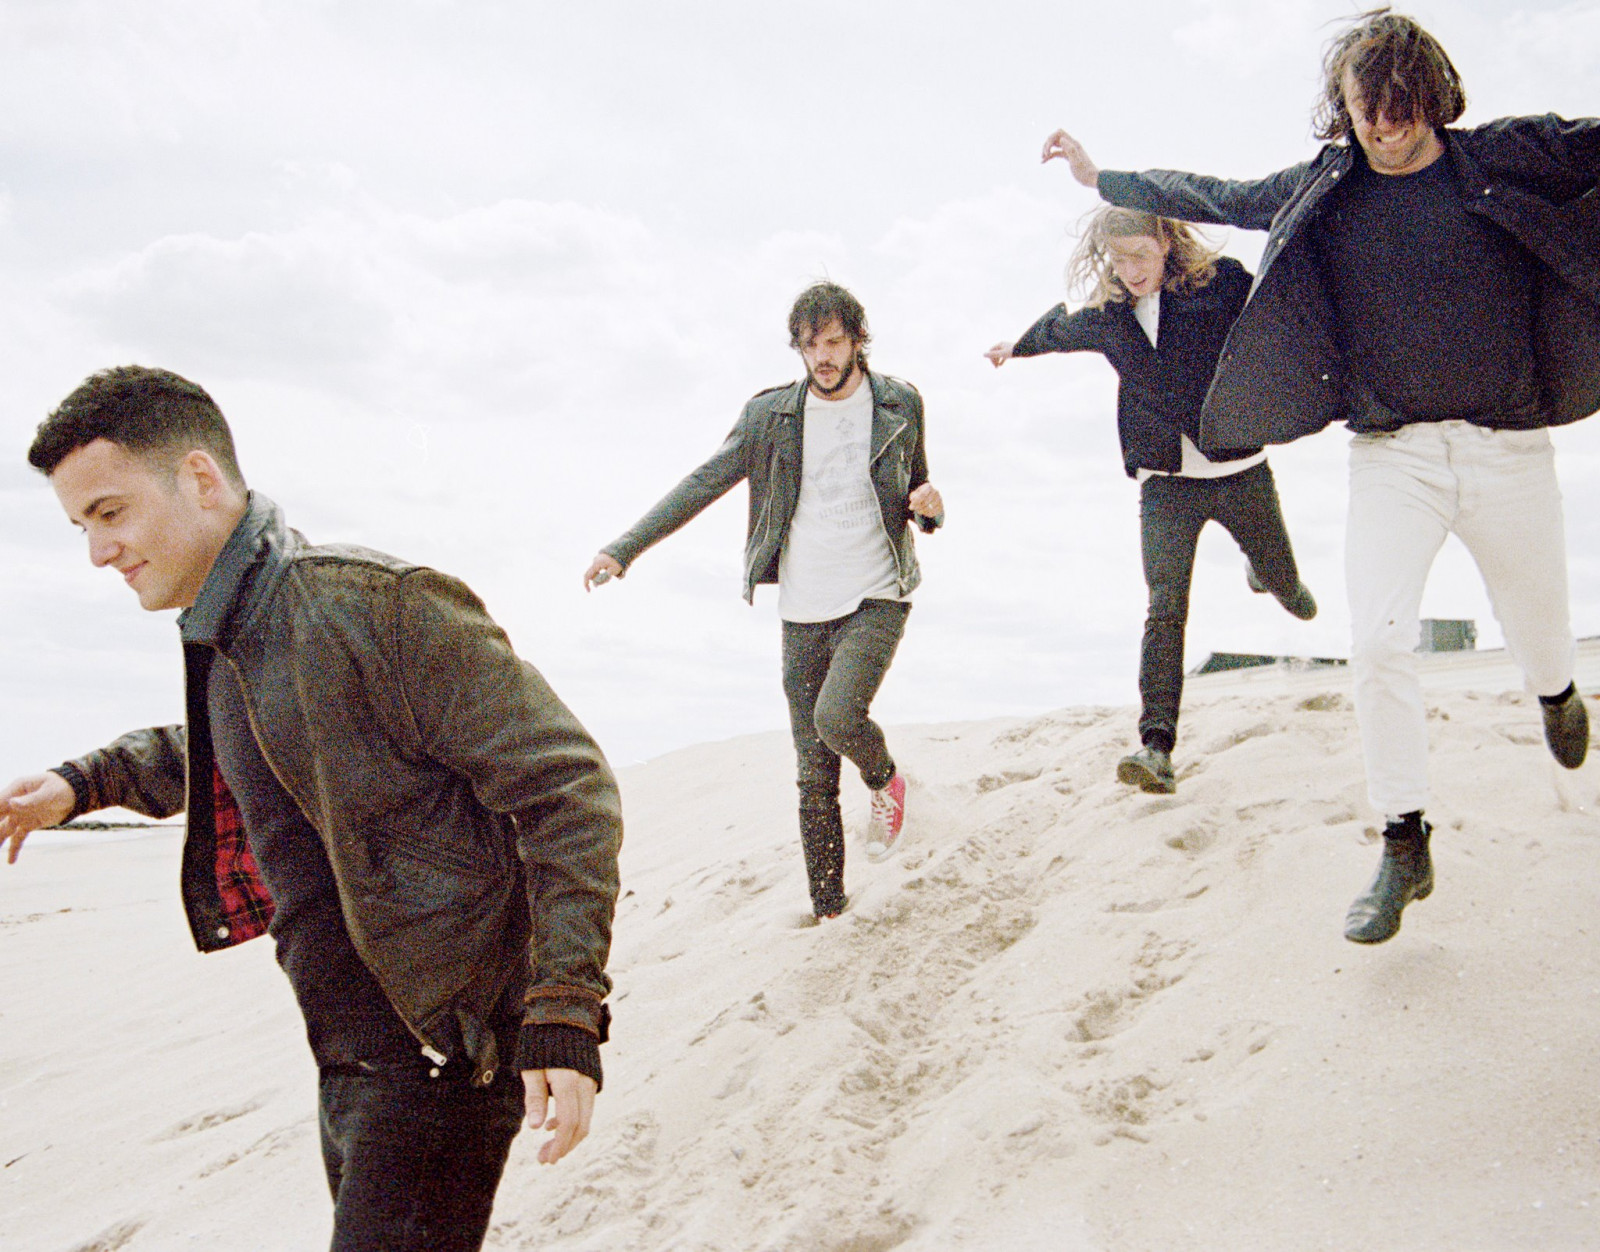 The Vaccines (The Vaccines)